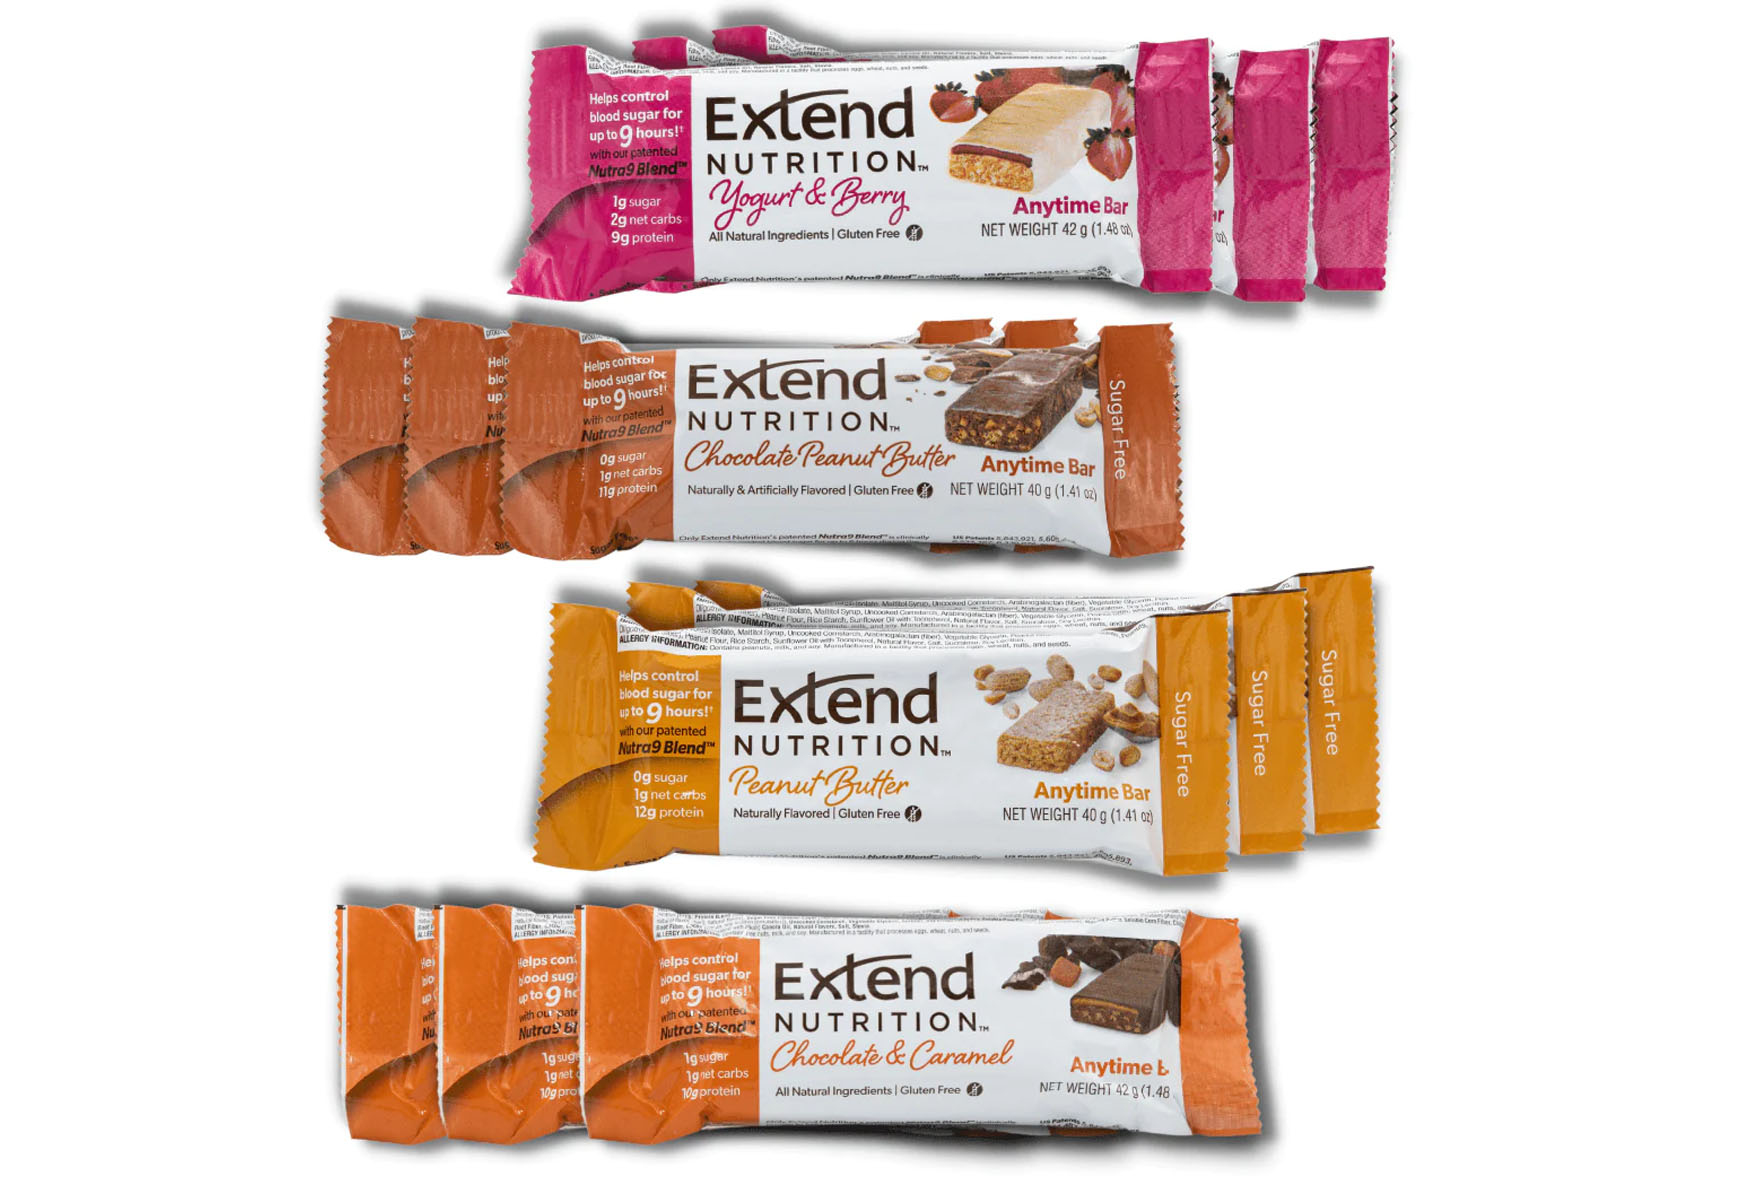 19-extend-nutrition-bars-nutrition-facts